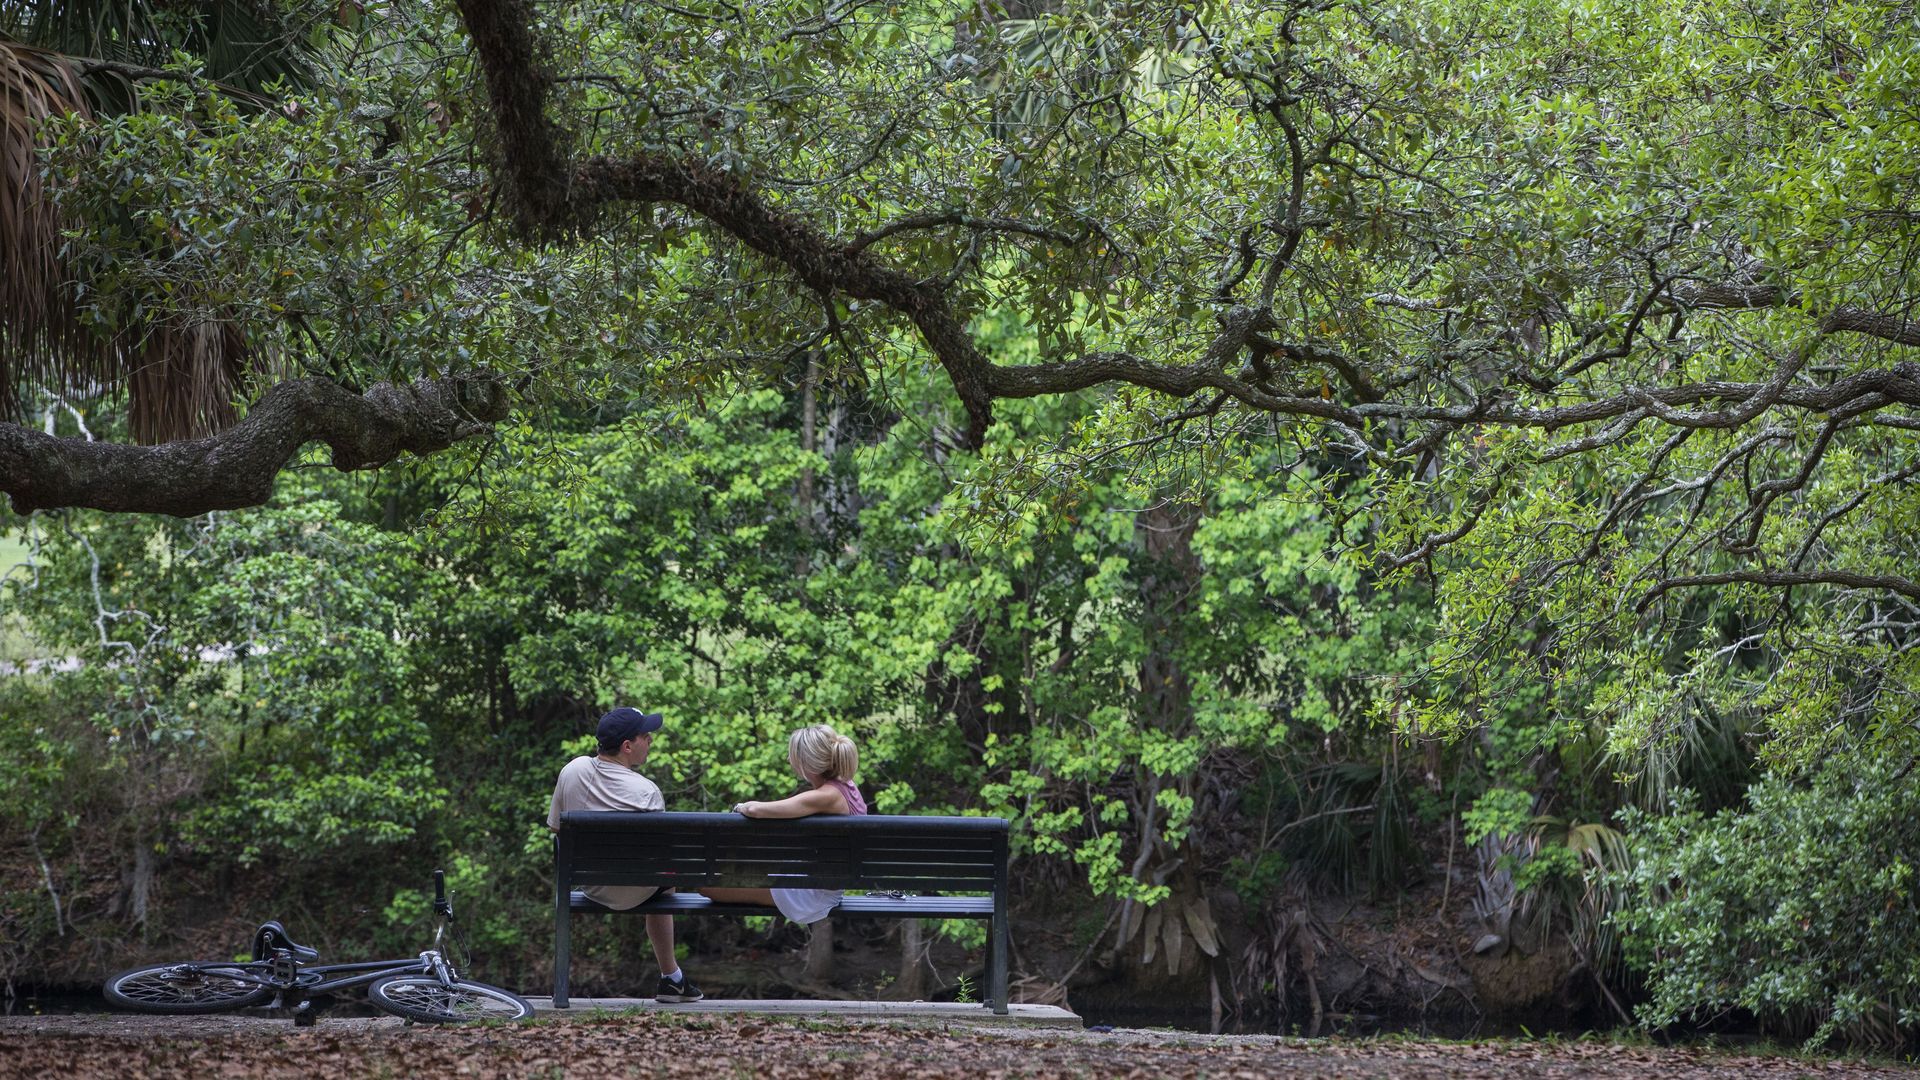 Photo shows two people sitting on a bench under live oak trees